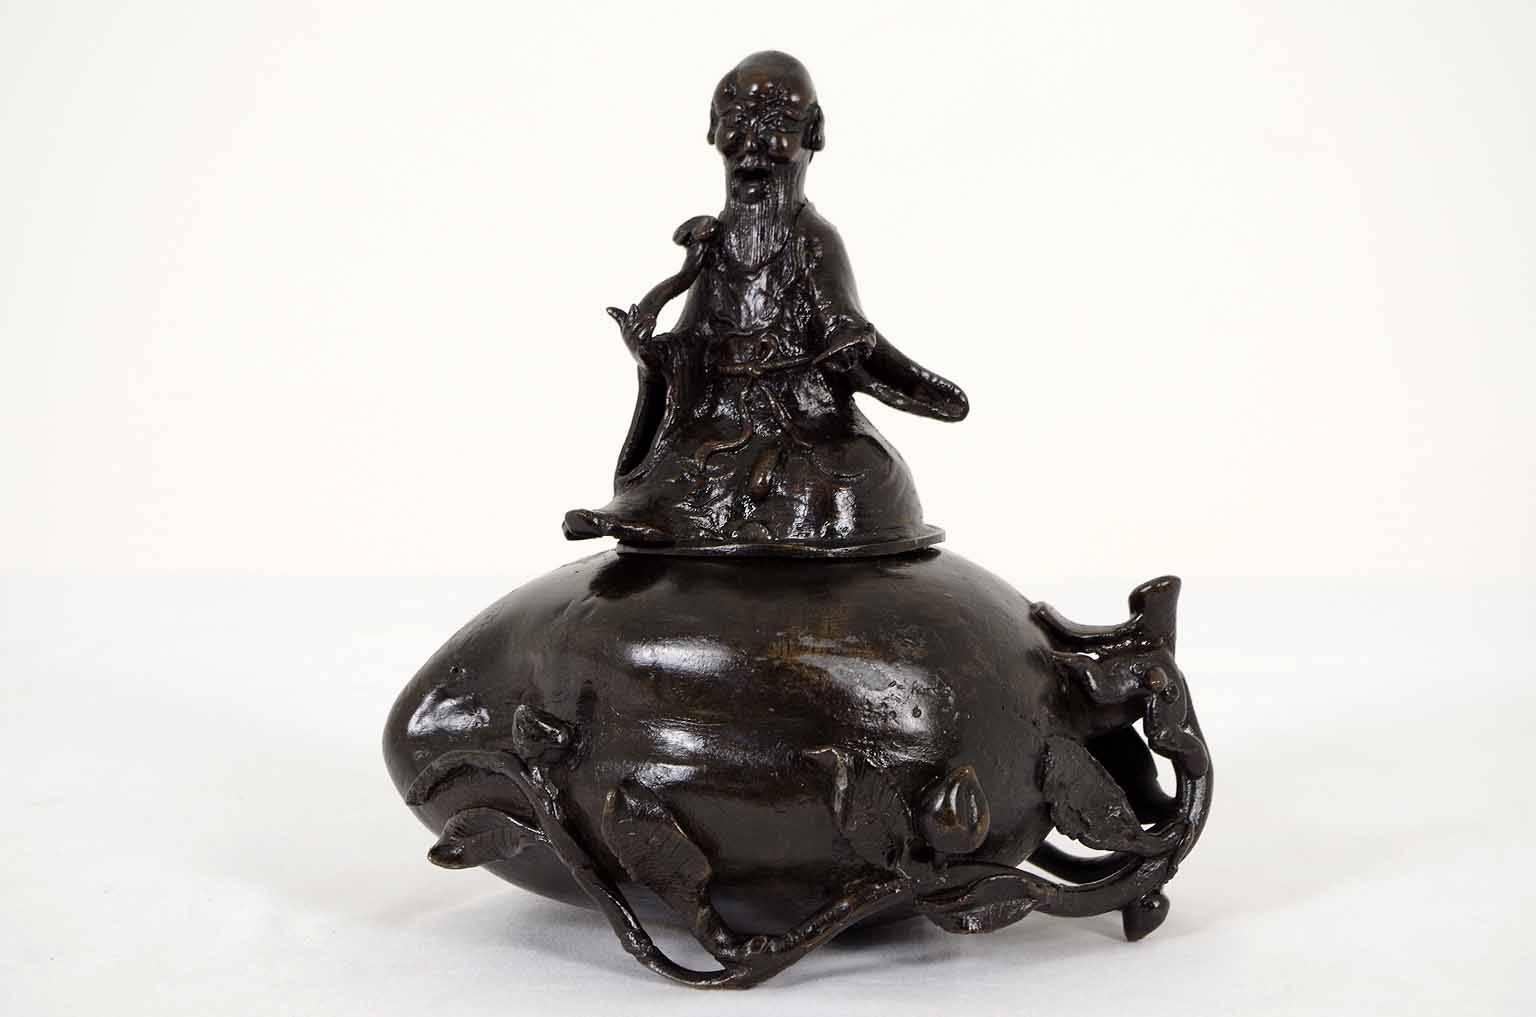 Mid-19th Century Wonderful 19th Century Chinese Bronze Censer, Incense Burner with Cover